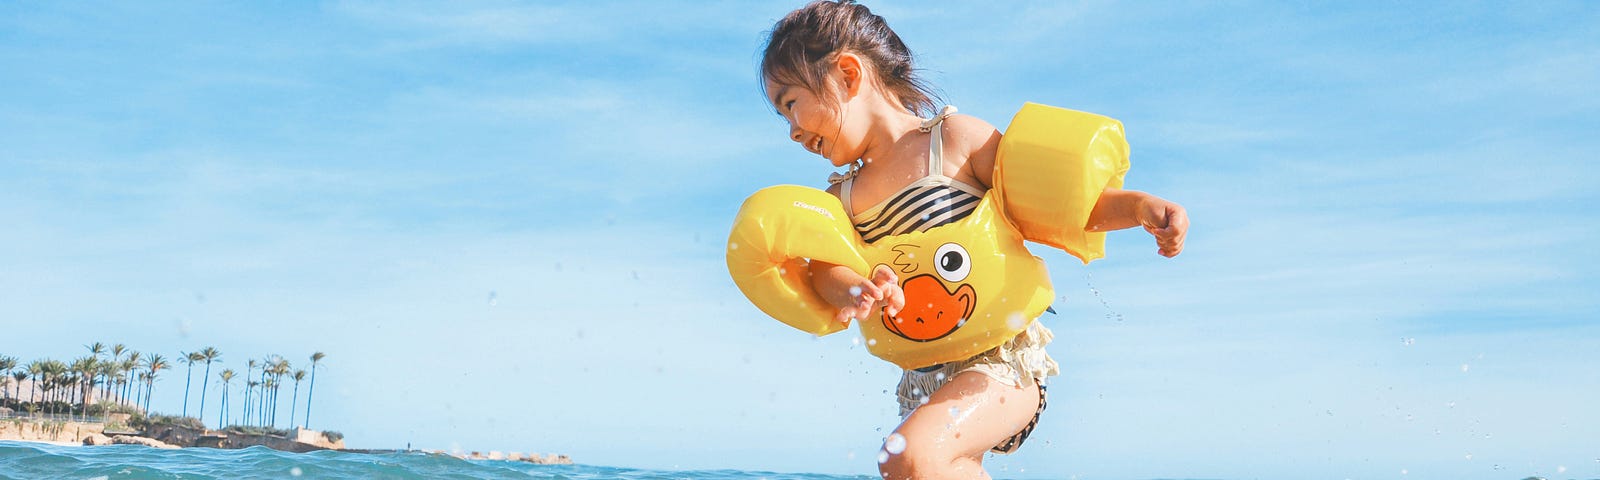 Image shows little girl in striped bathing suit and yellow ducky inflatable life vest/water wings happily playing and splashing on the shallow surf of a beach. Blue sky in the background and palm trees in the distance.